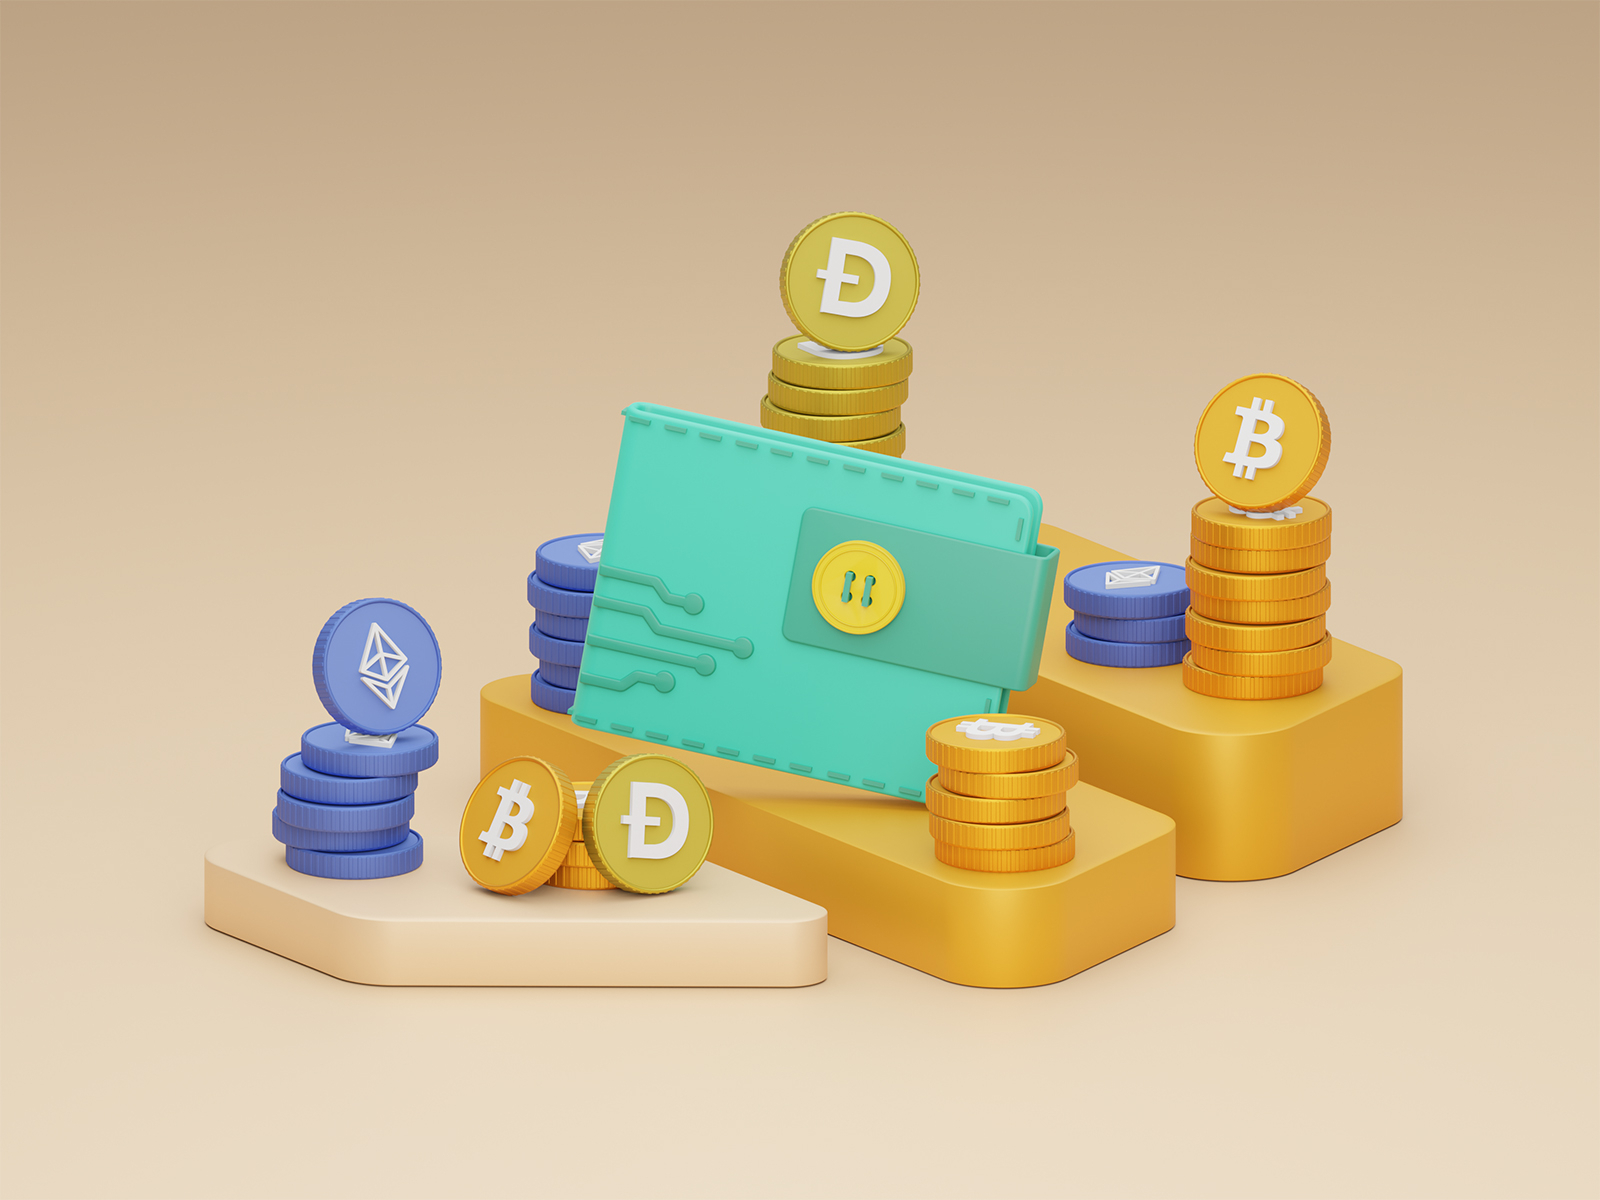 Cryptocurrency Wallet 3D Illustration by Erfan on Dribbble